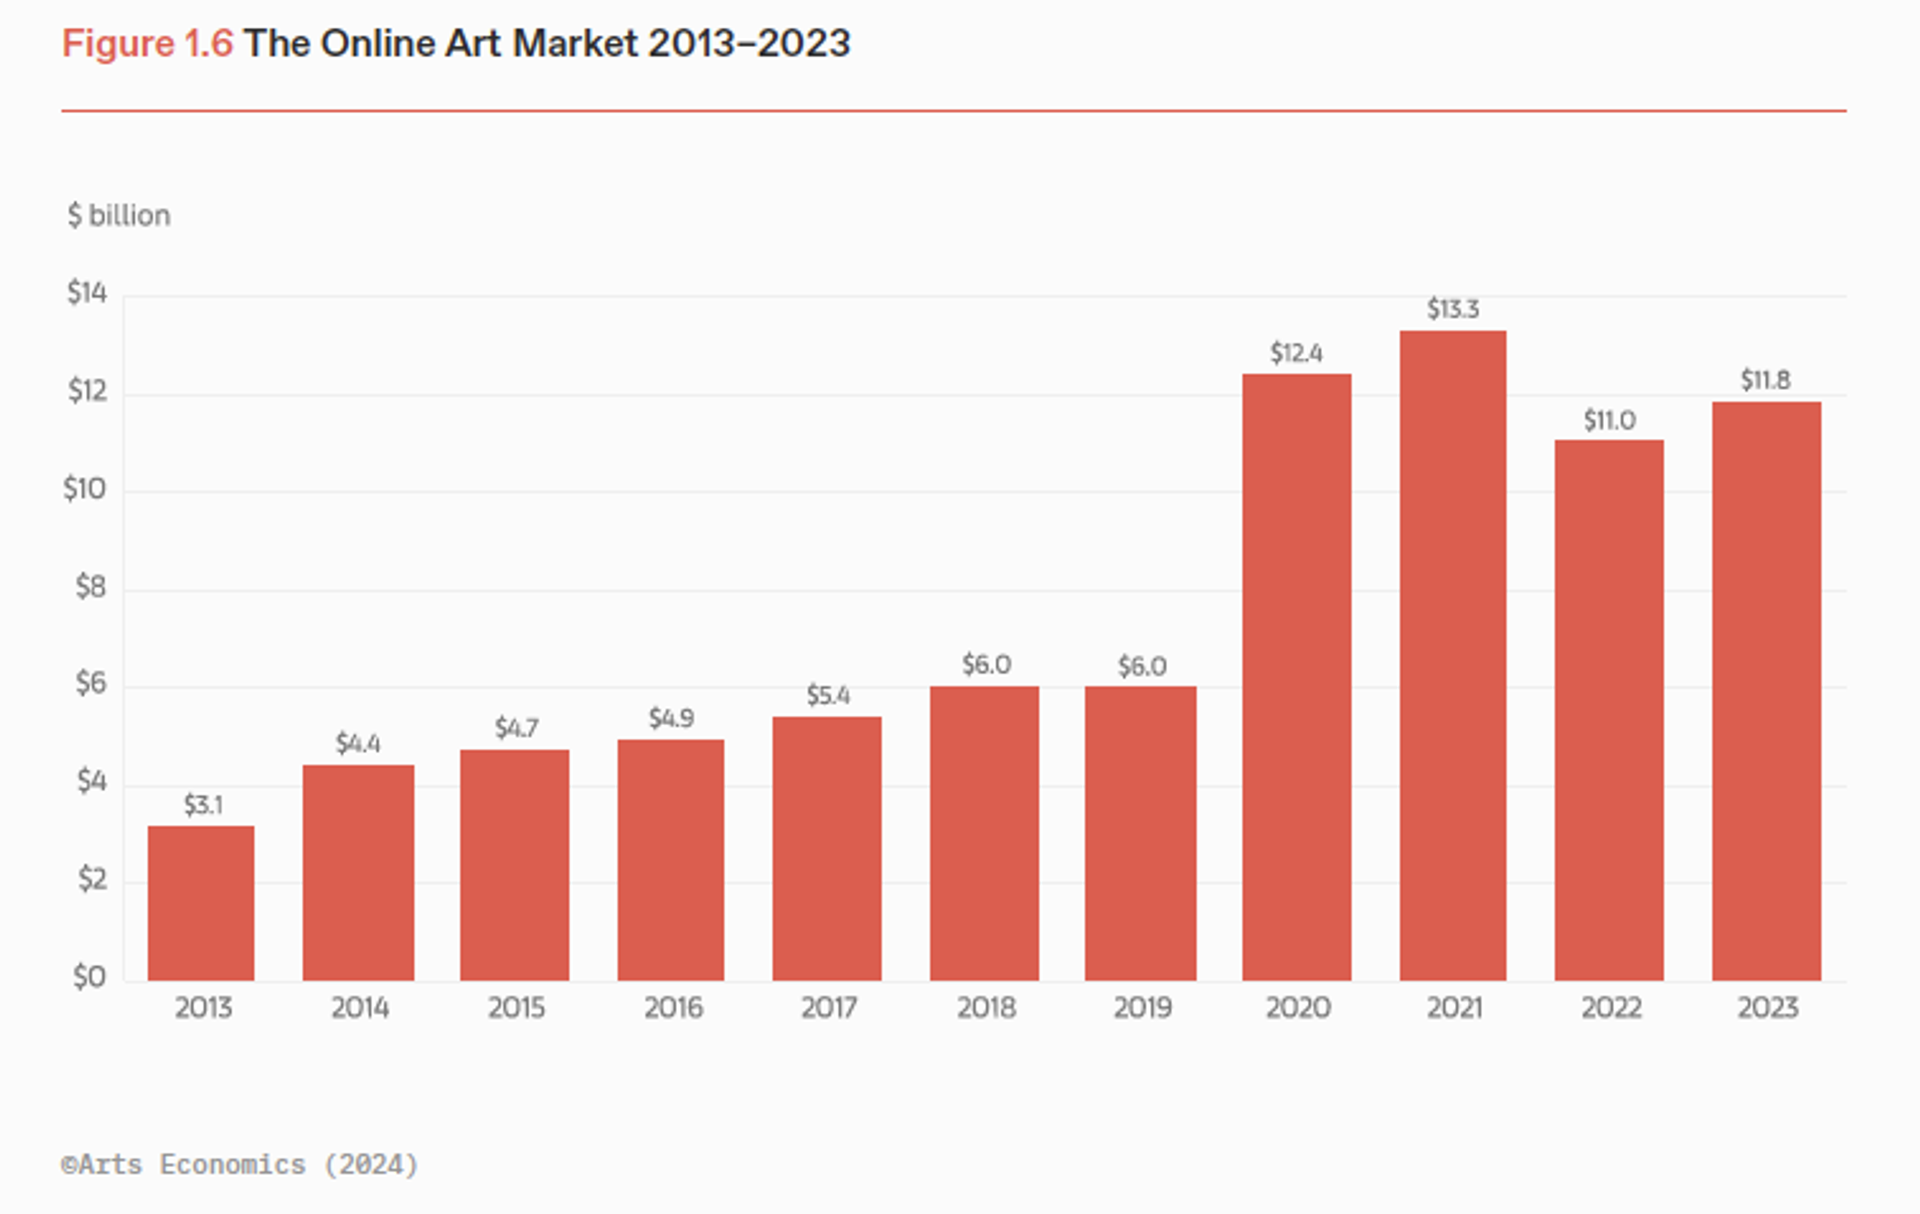 Bar graph of the online art market sales from 2013 - 2023. 